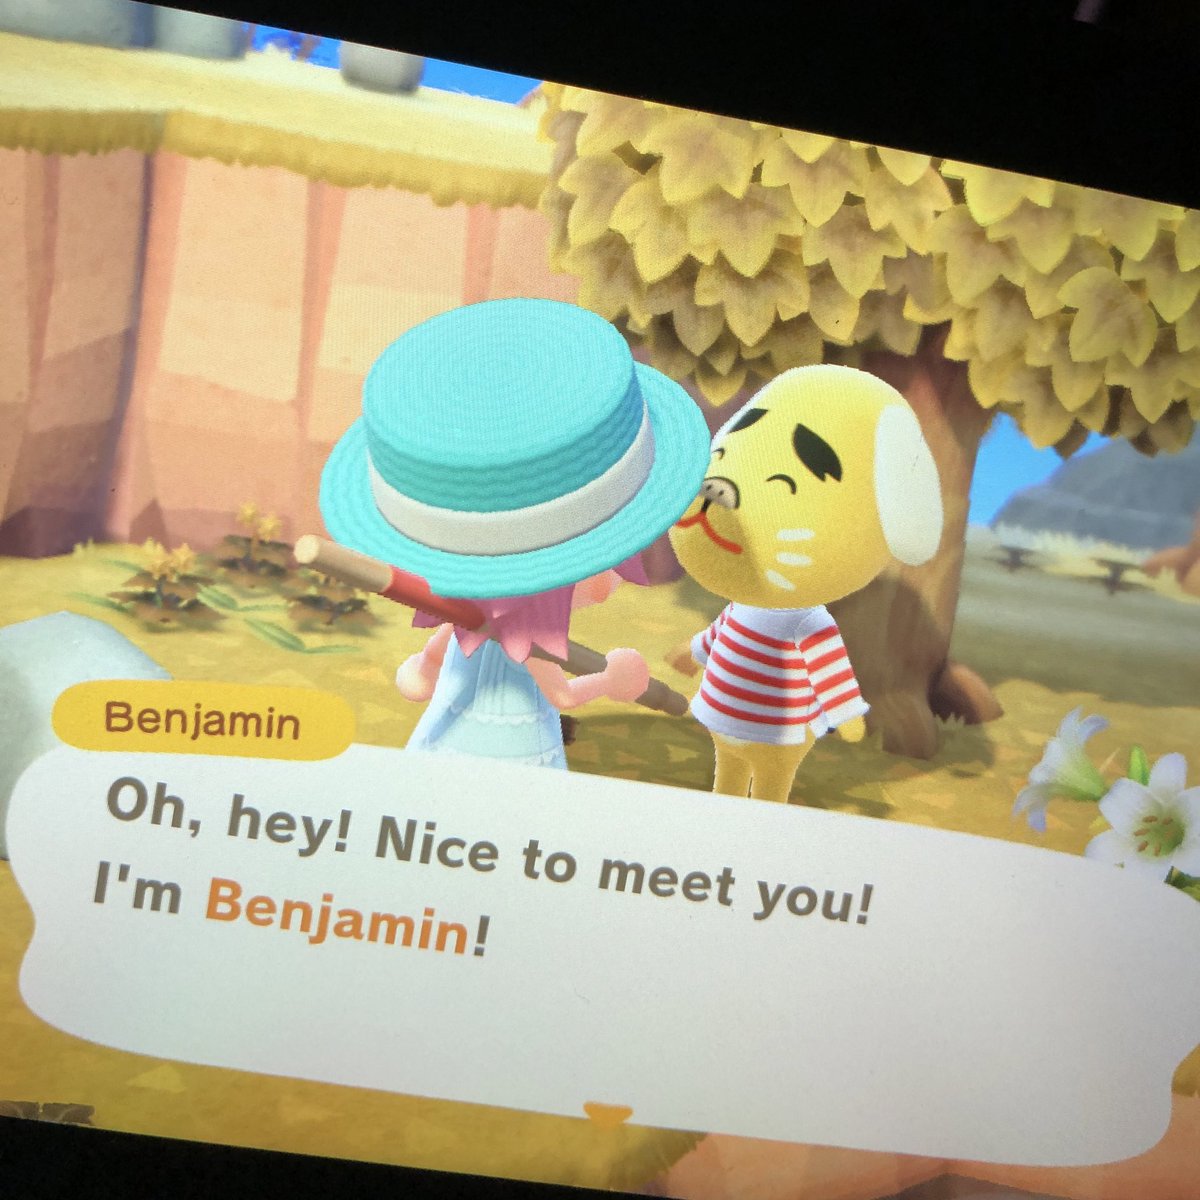 island 2 - benjamincute!! but if im taking any dog villager its gonna be daisy!